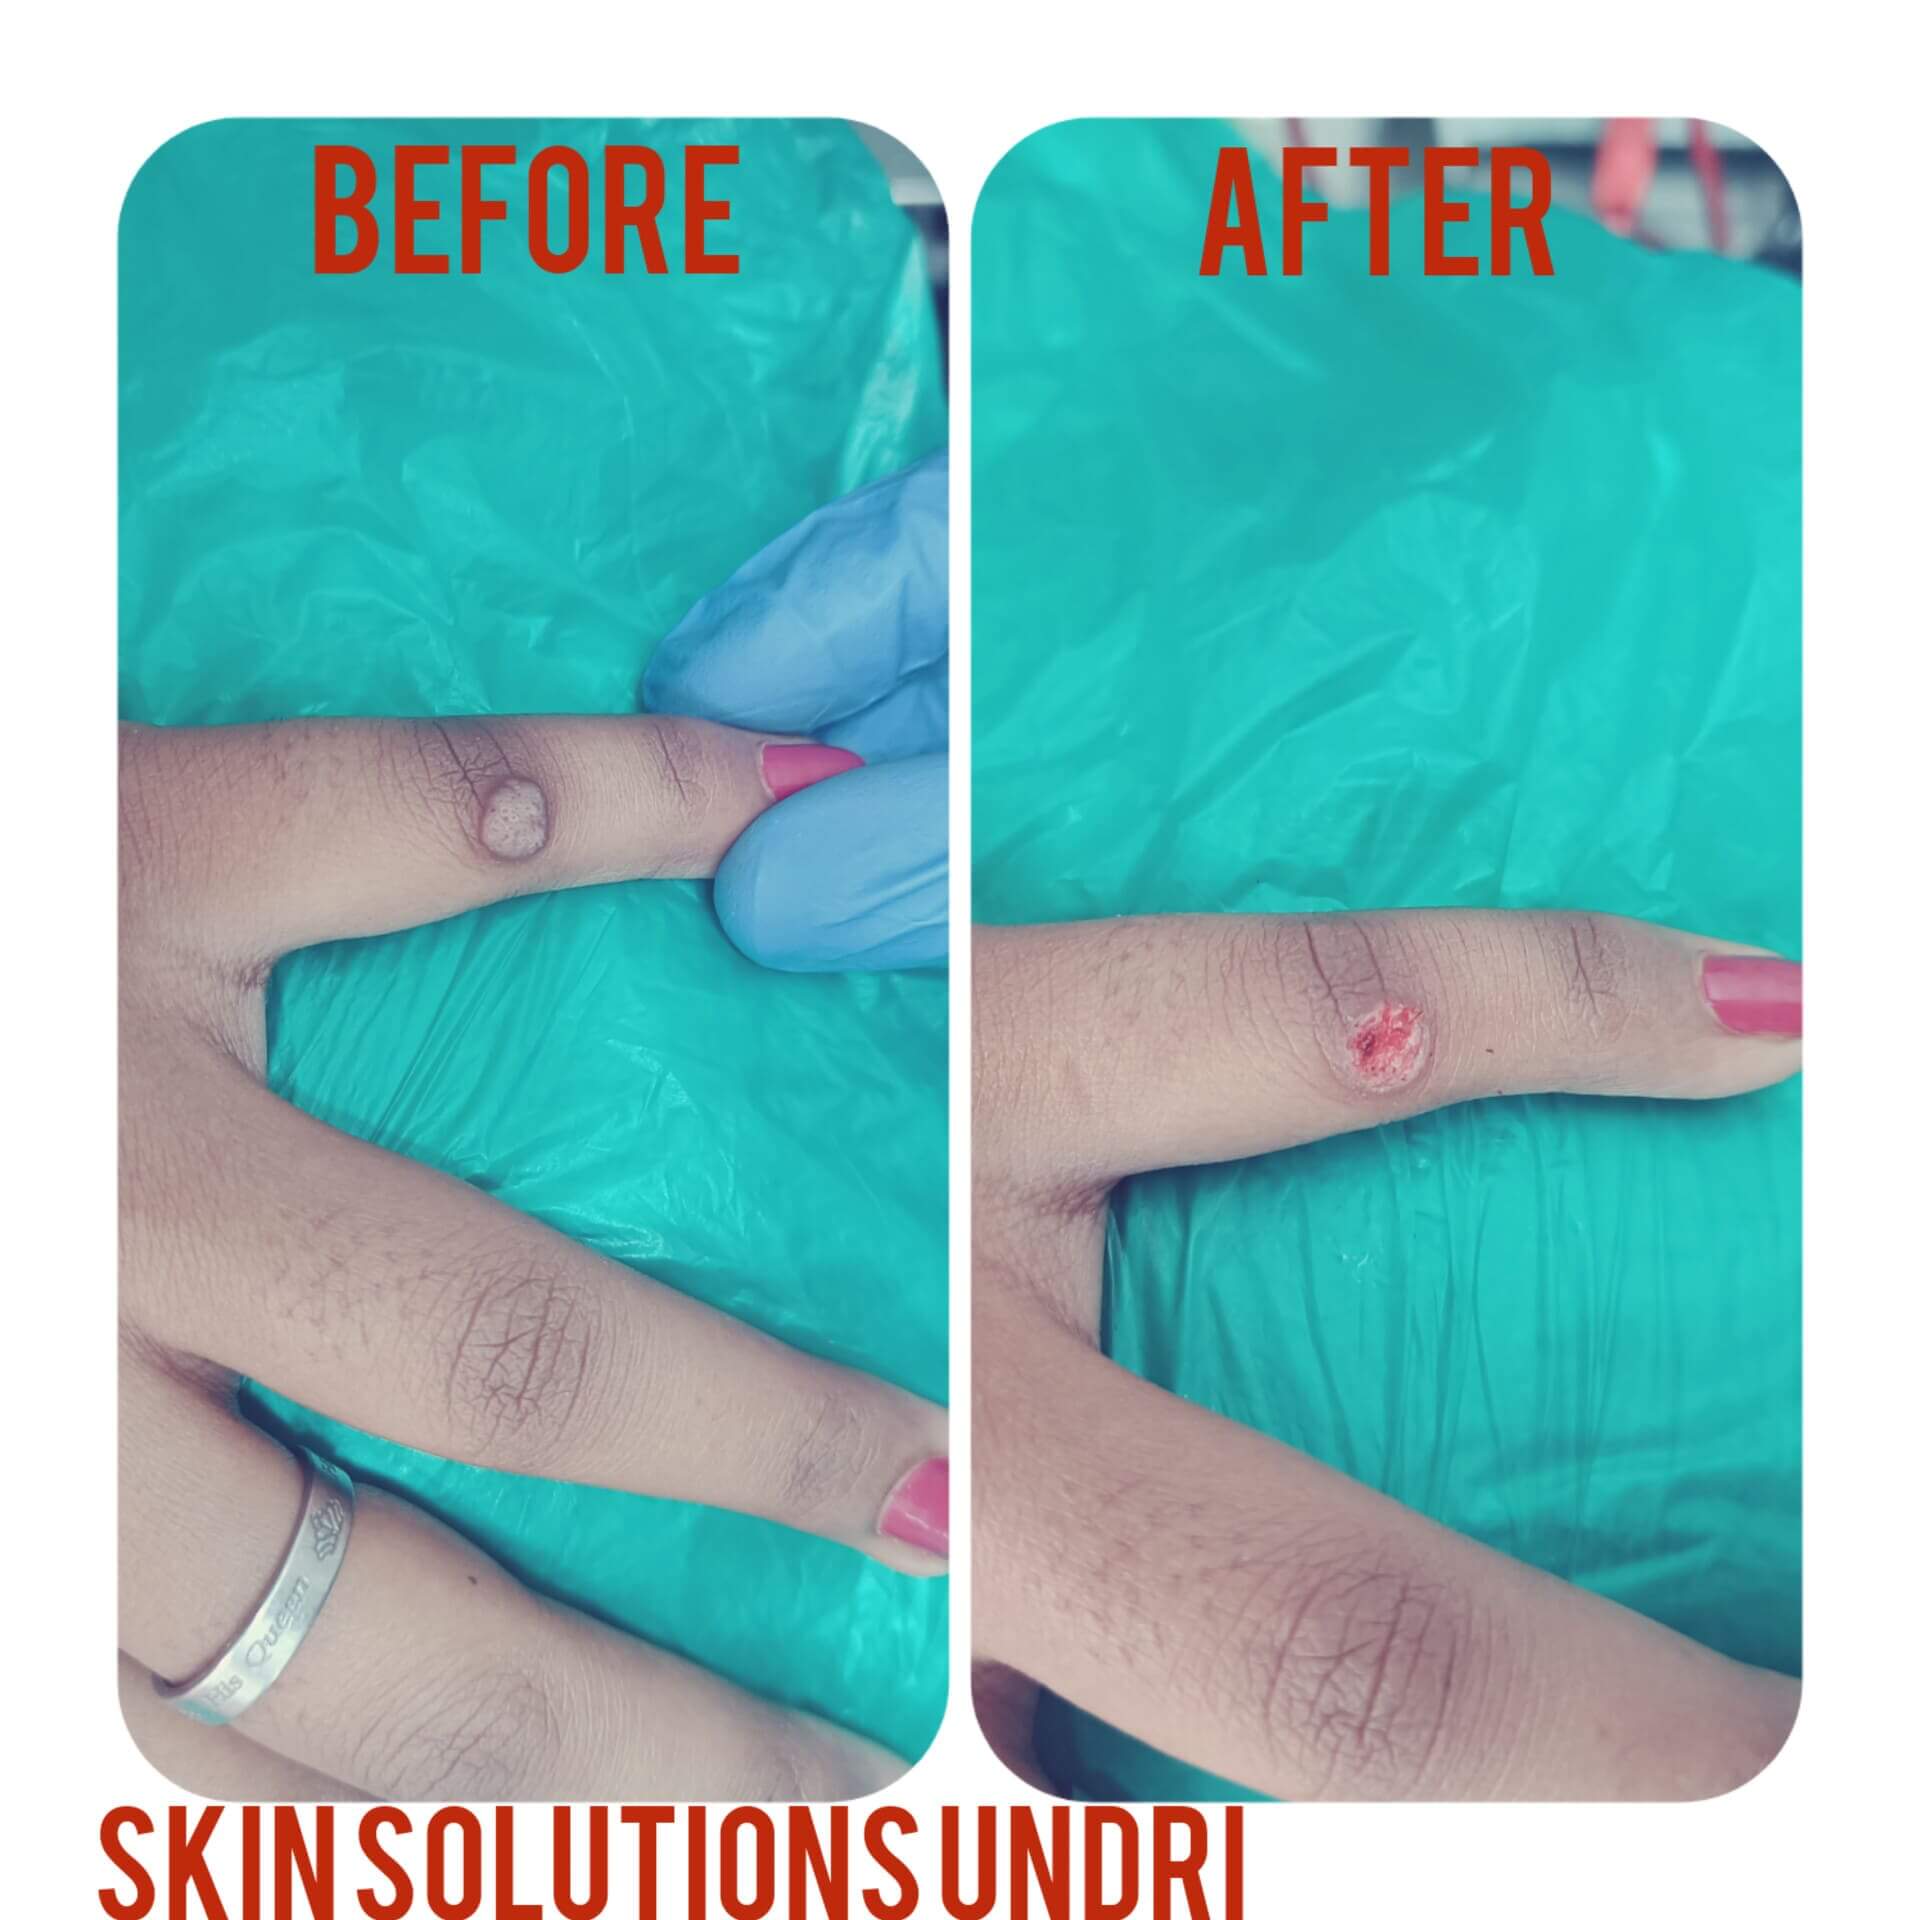 results-skinsolutions-bizknow.in-2